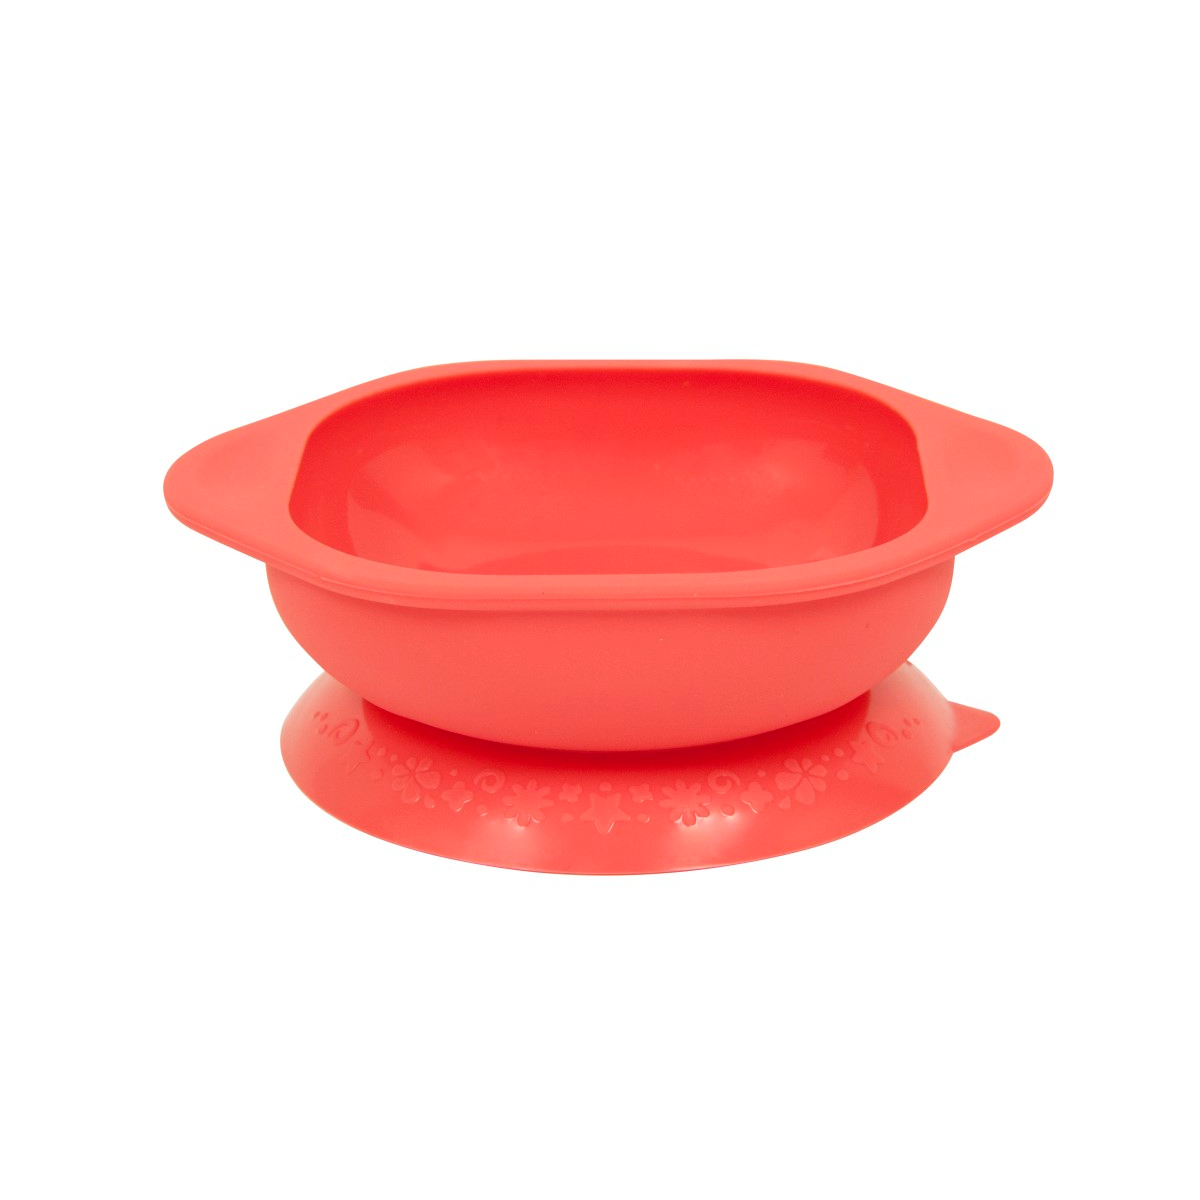 Marcus & Marcus Marcus The Lion Red Suction Bowl